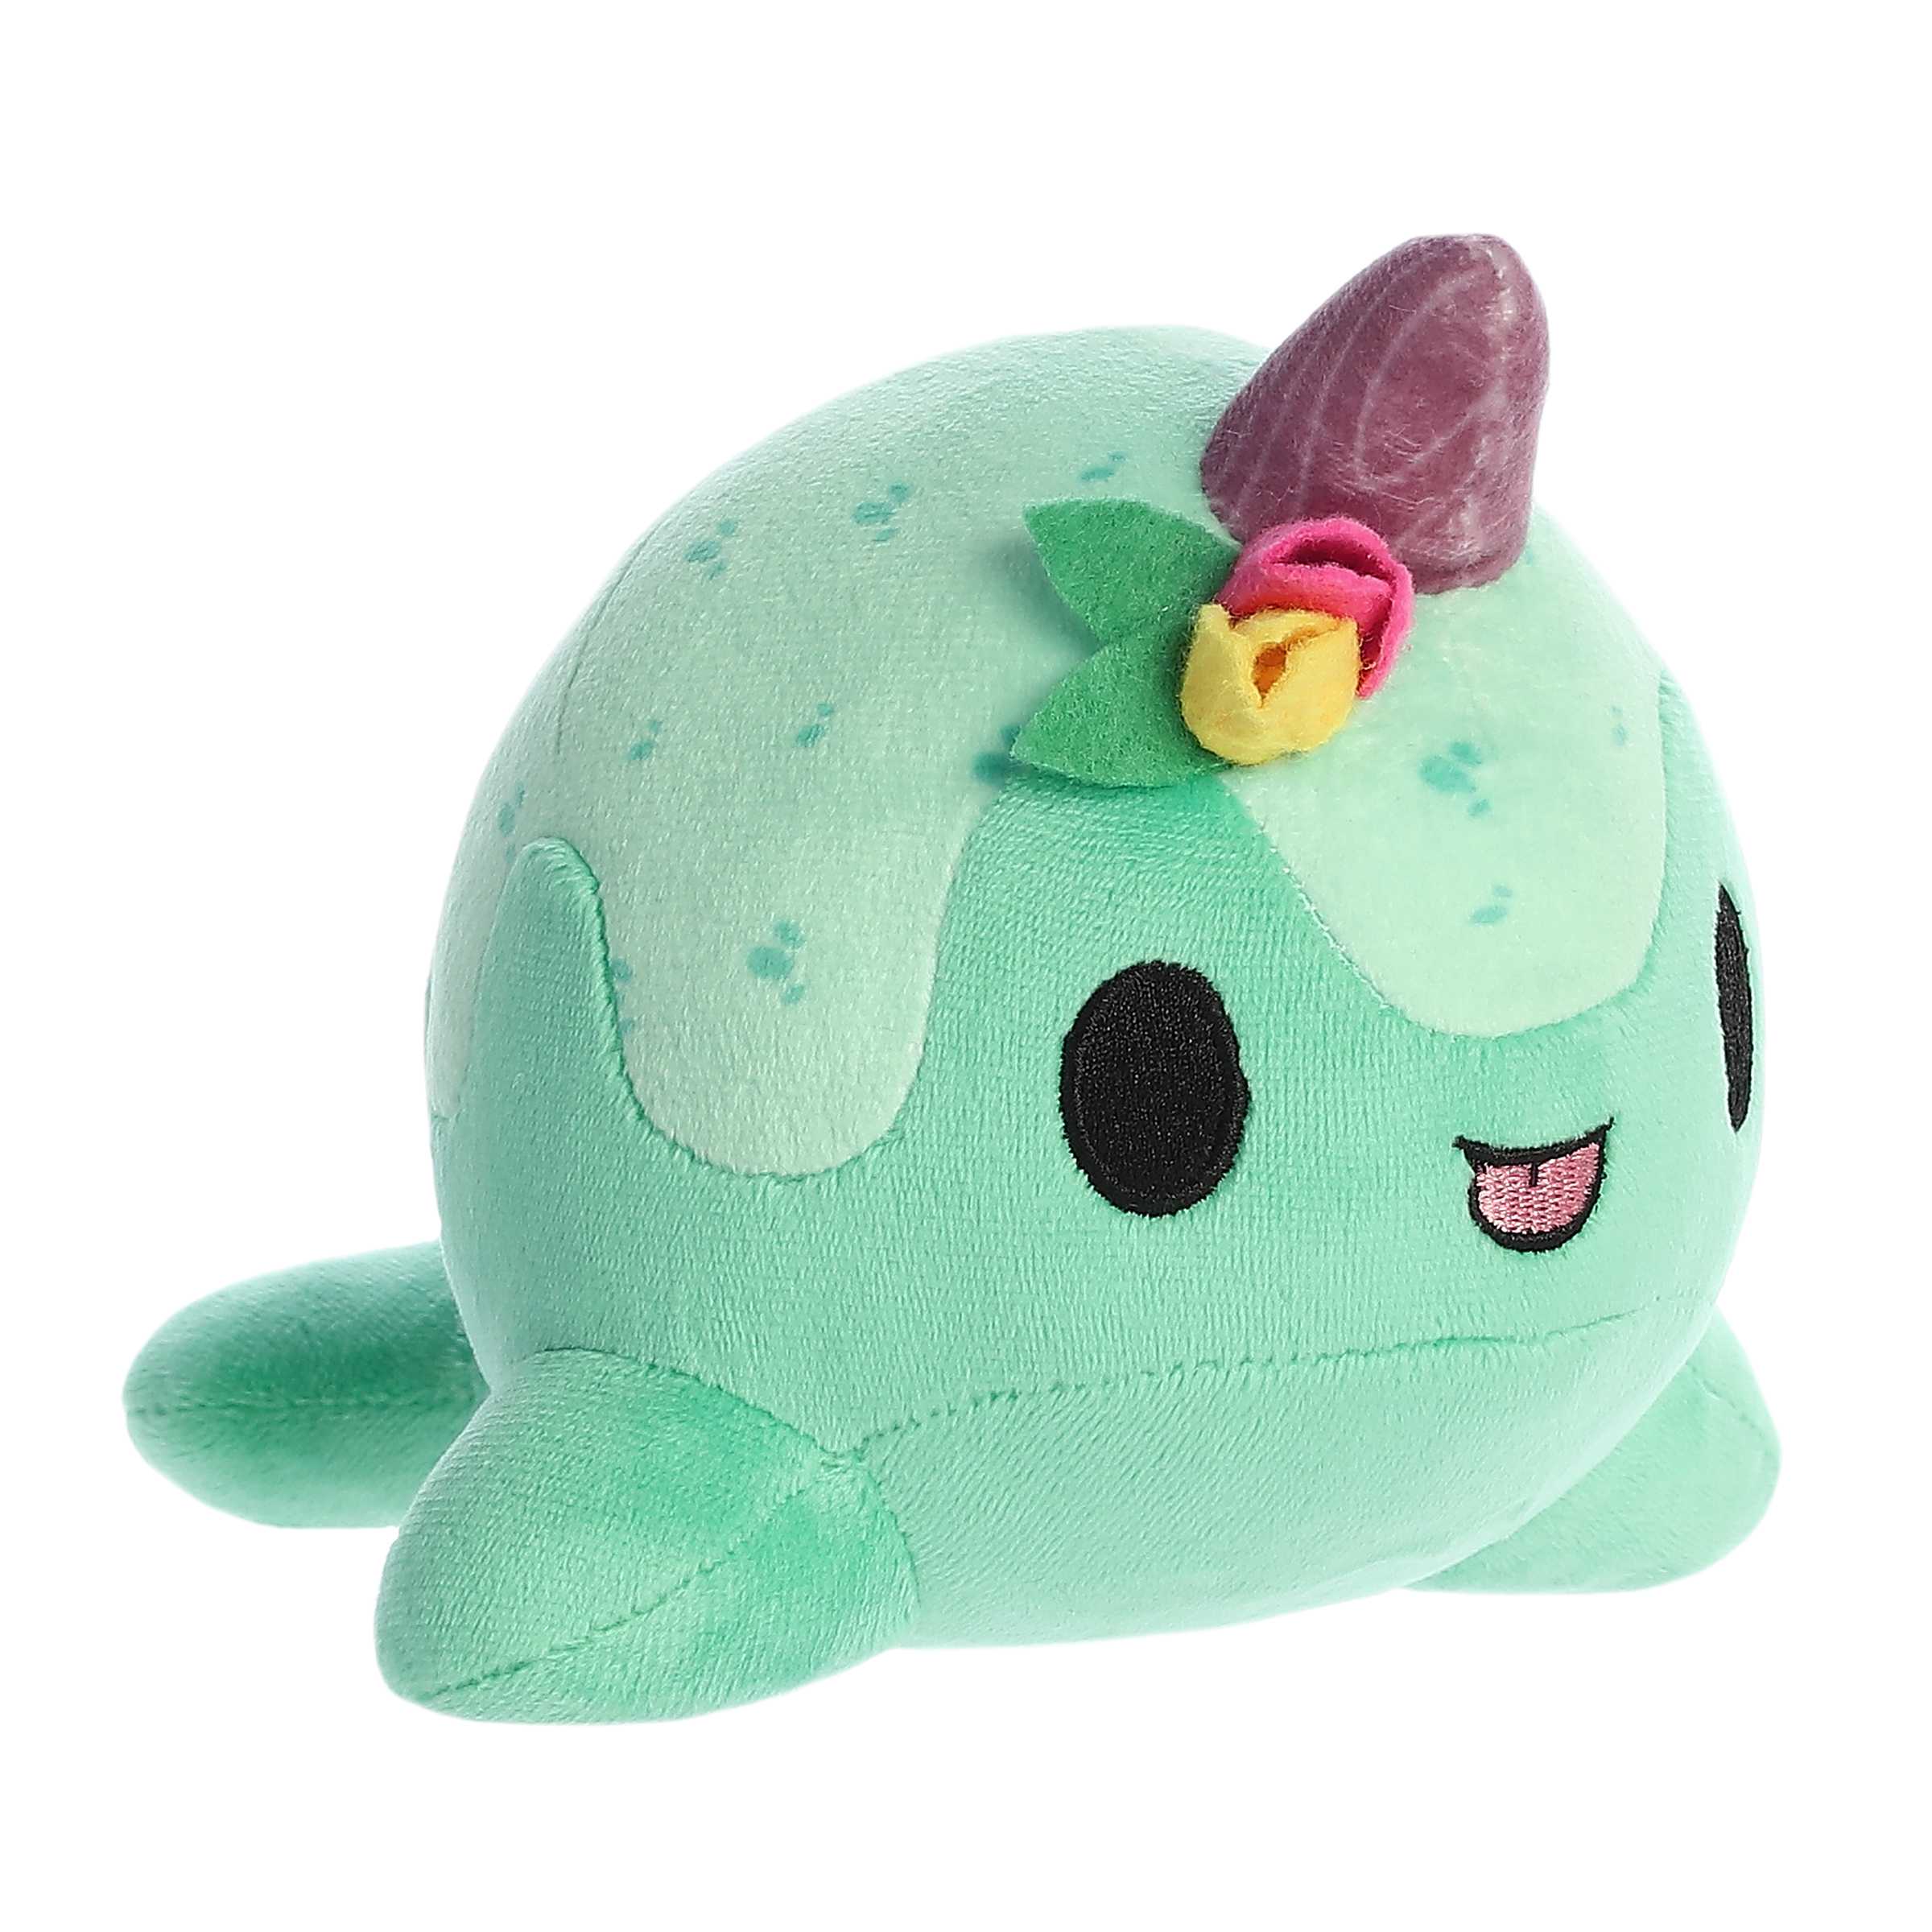 Tulip Nomwhal plush in minty green, adorned with a colorful tulip and sparkling horn, perfect for gifting and collecting.